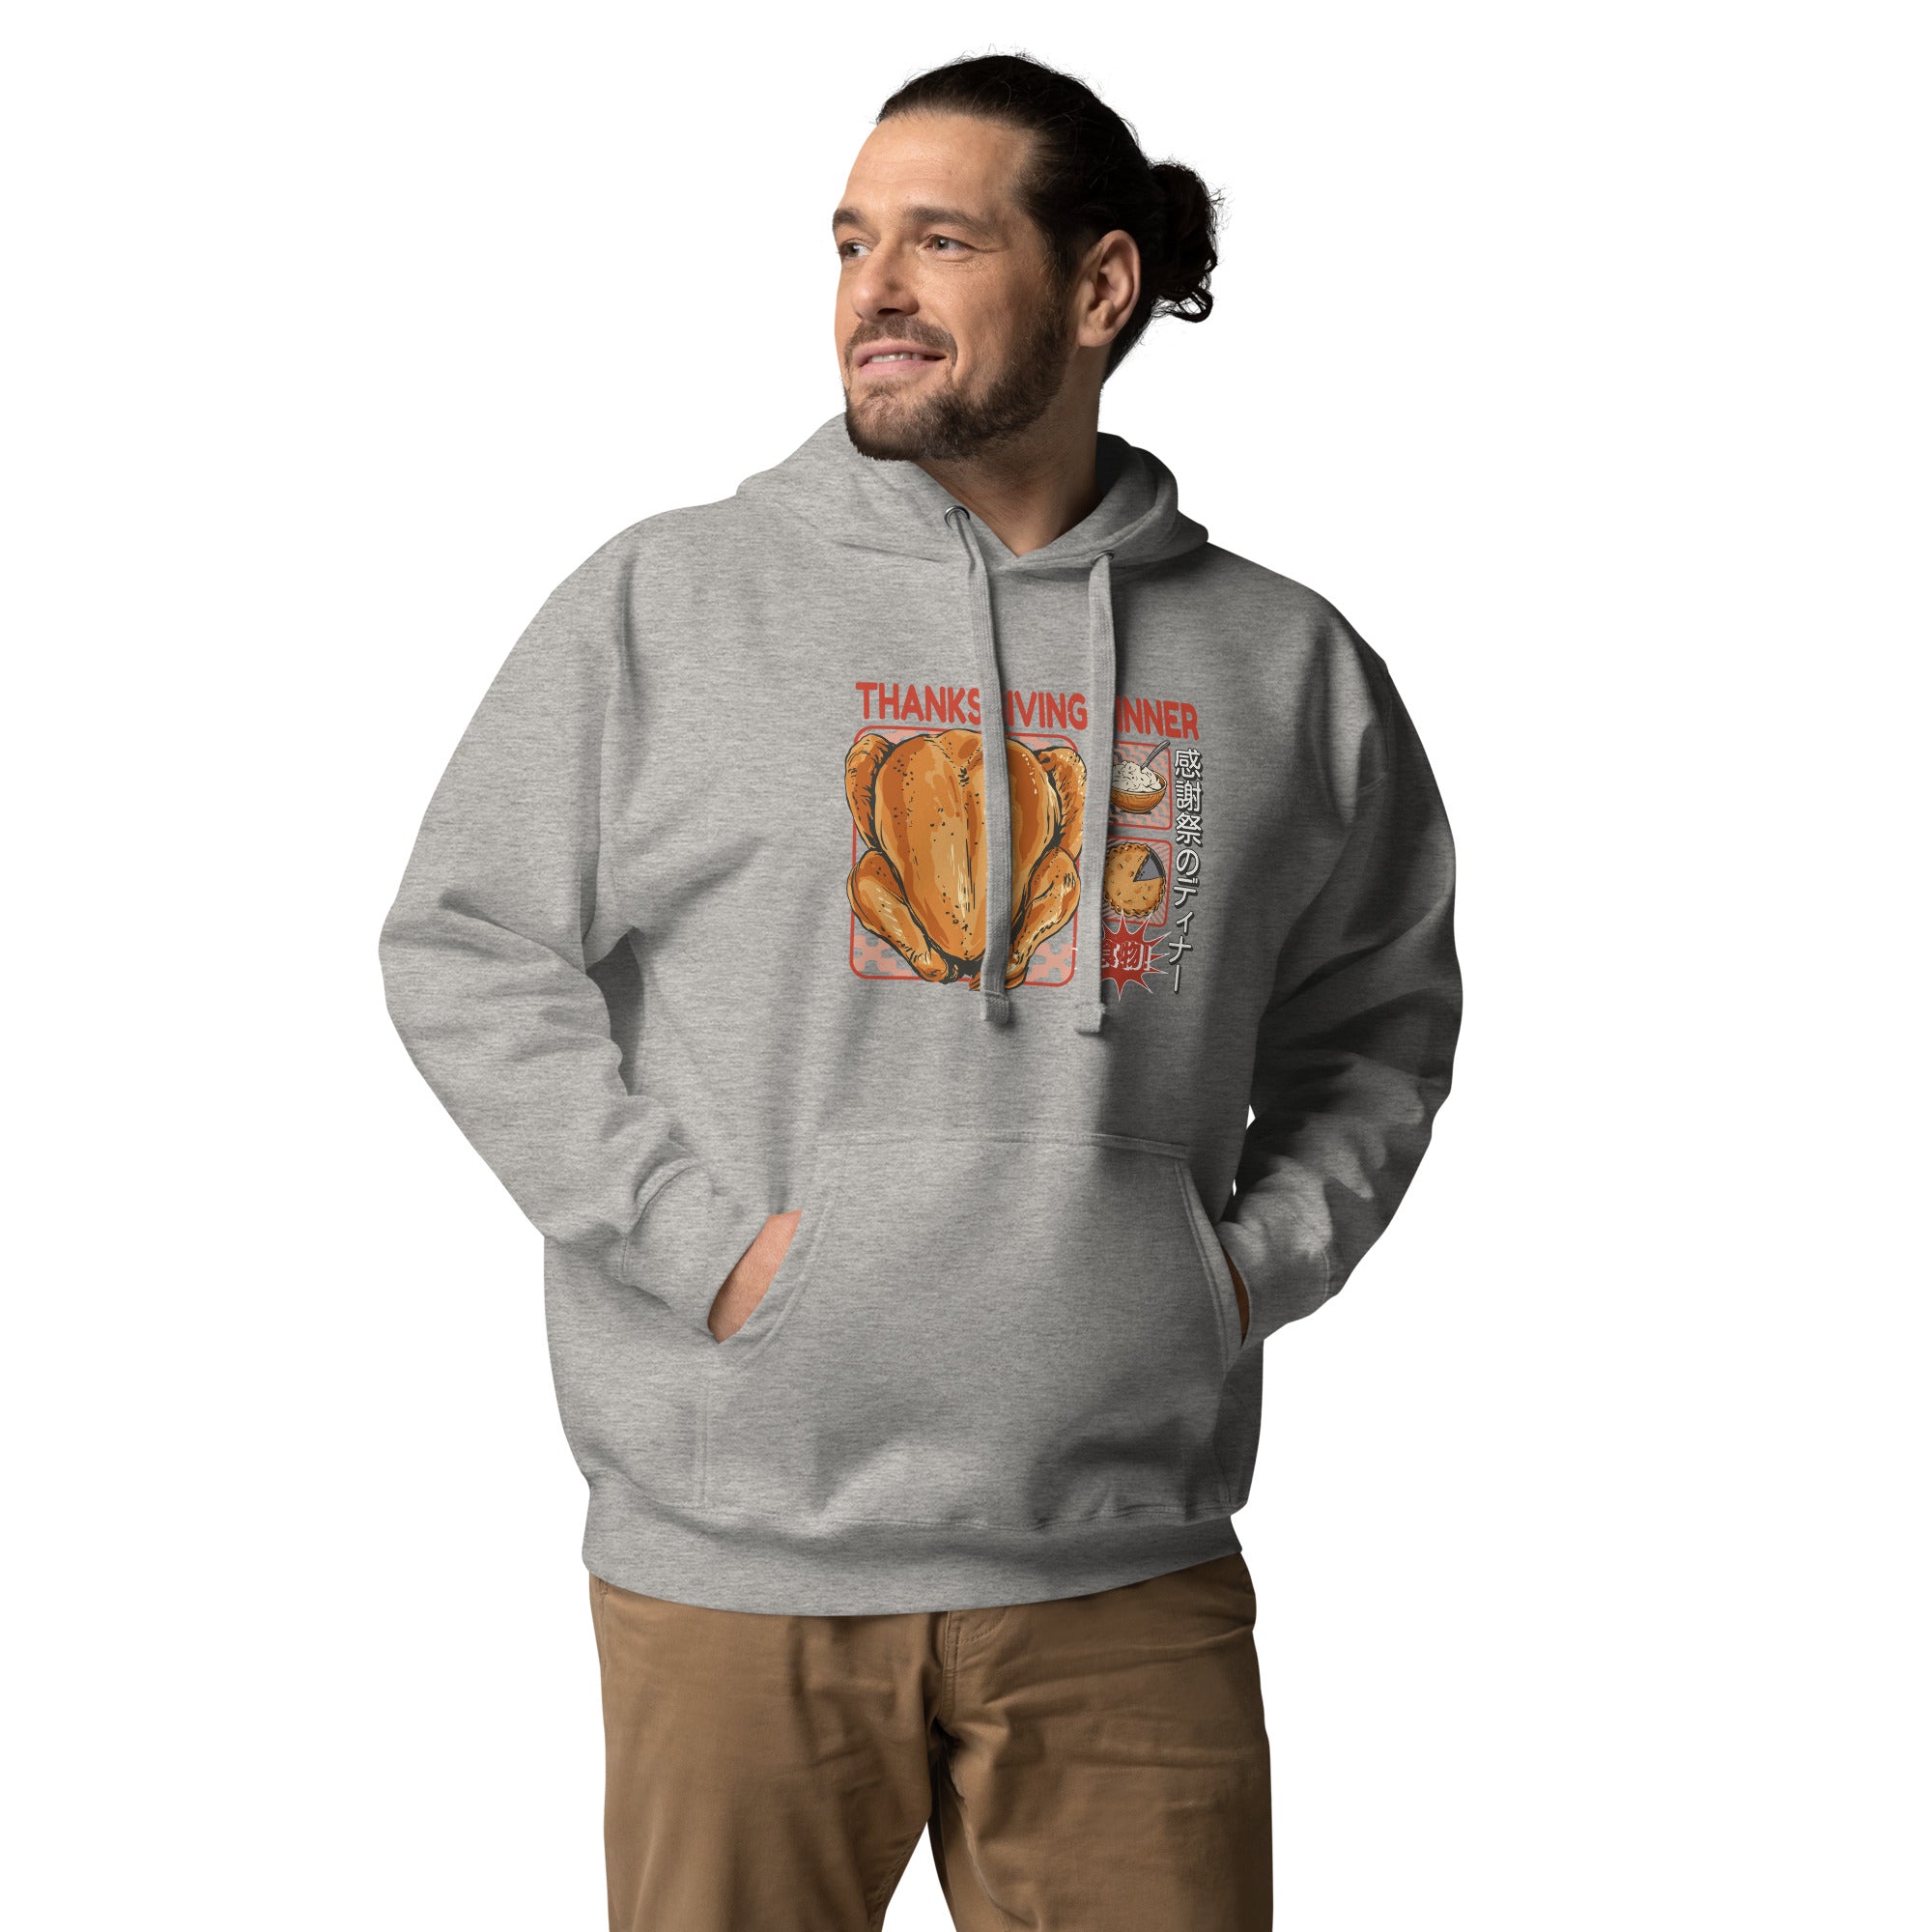 Man wearing a Japanese Thanksgiving hoodie in Carbon Grey colorway, featuring a graphic print of a roast chicken, Japanese potato salad, and an apple pie.